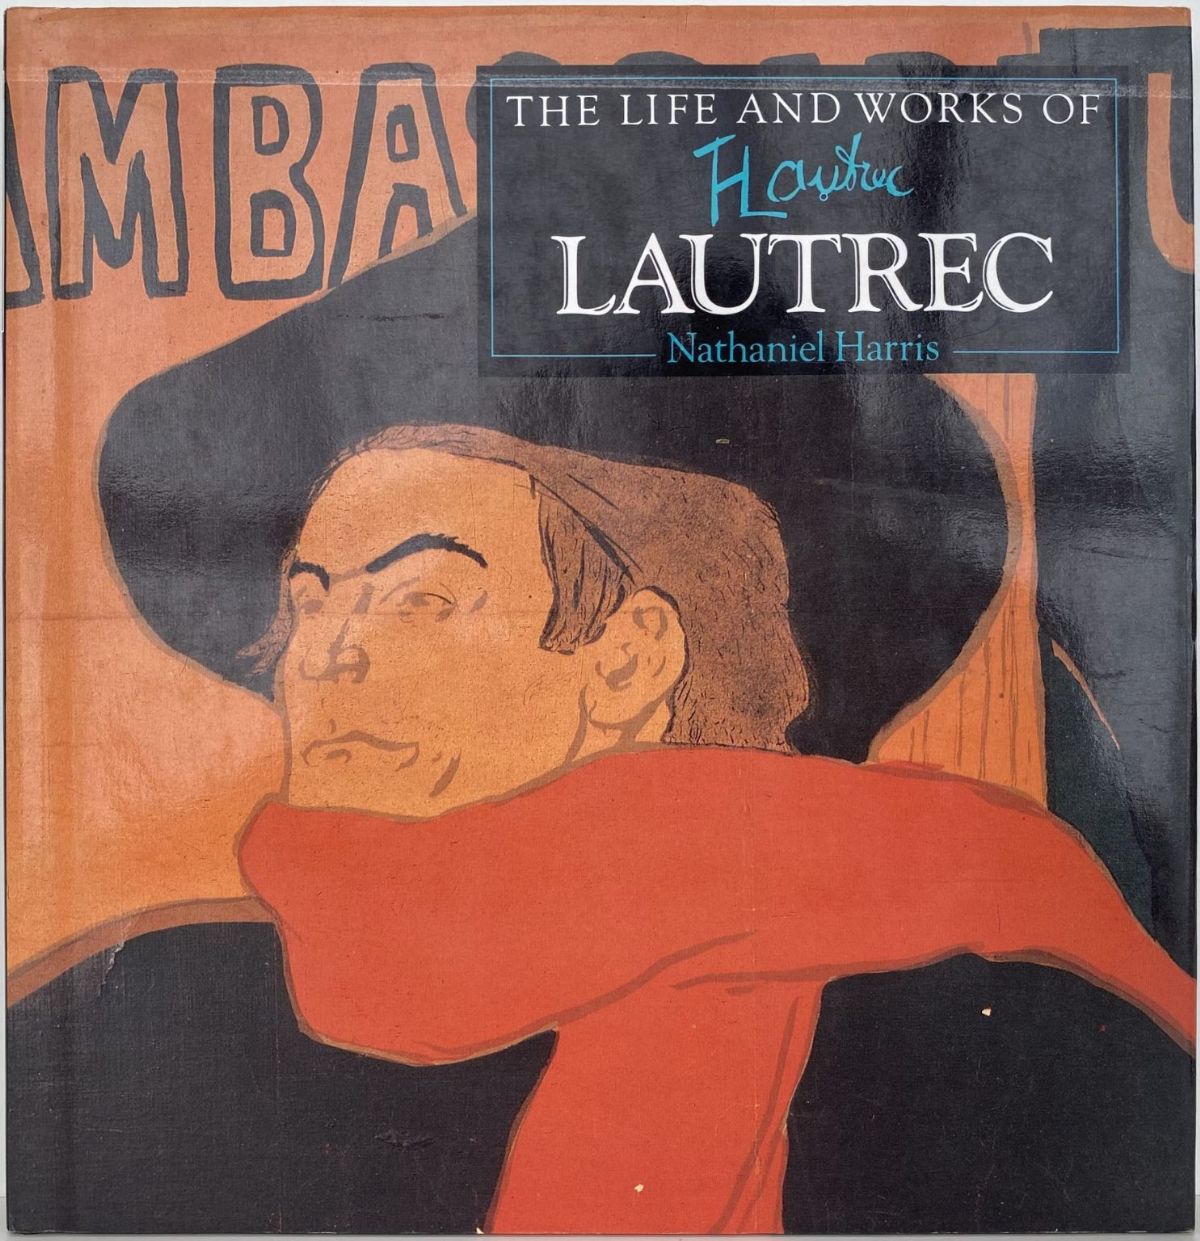 The Life and Works of LAUTREC